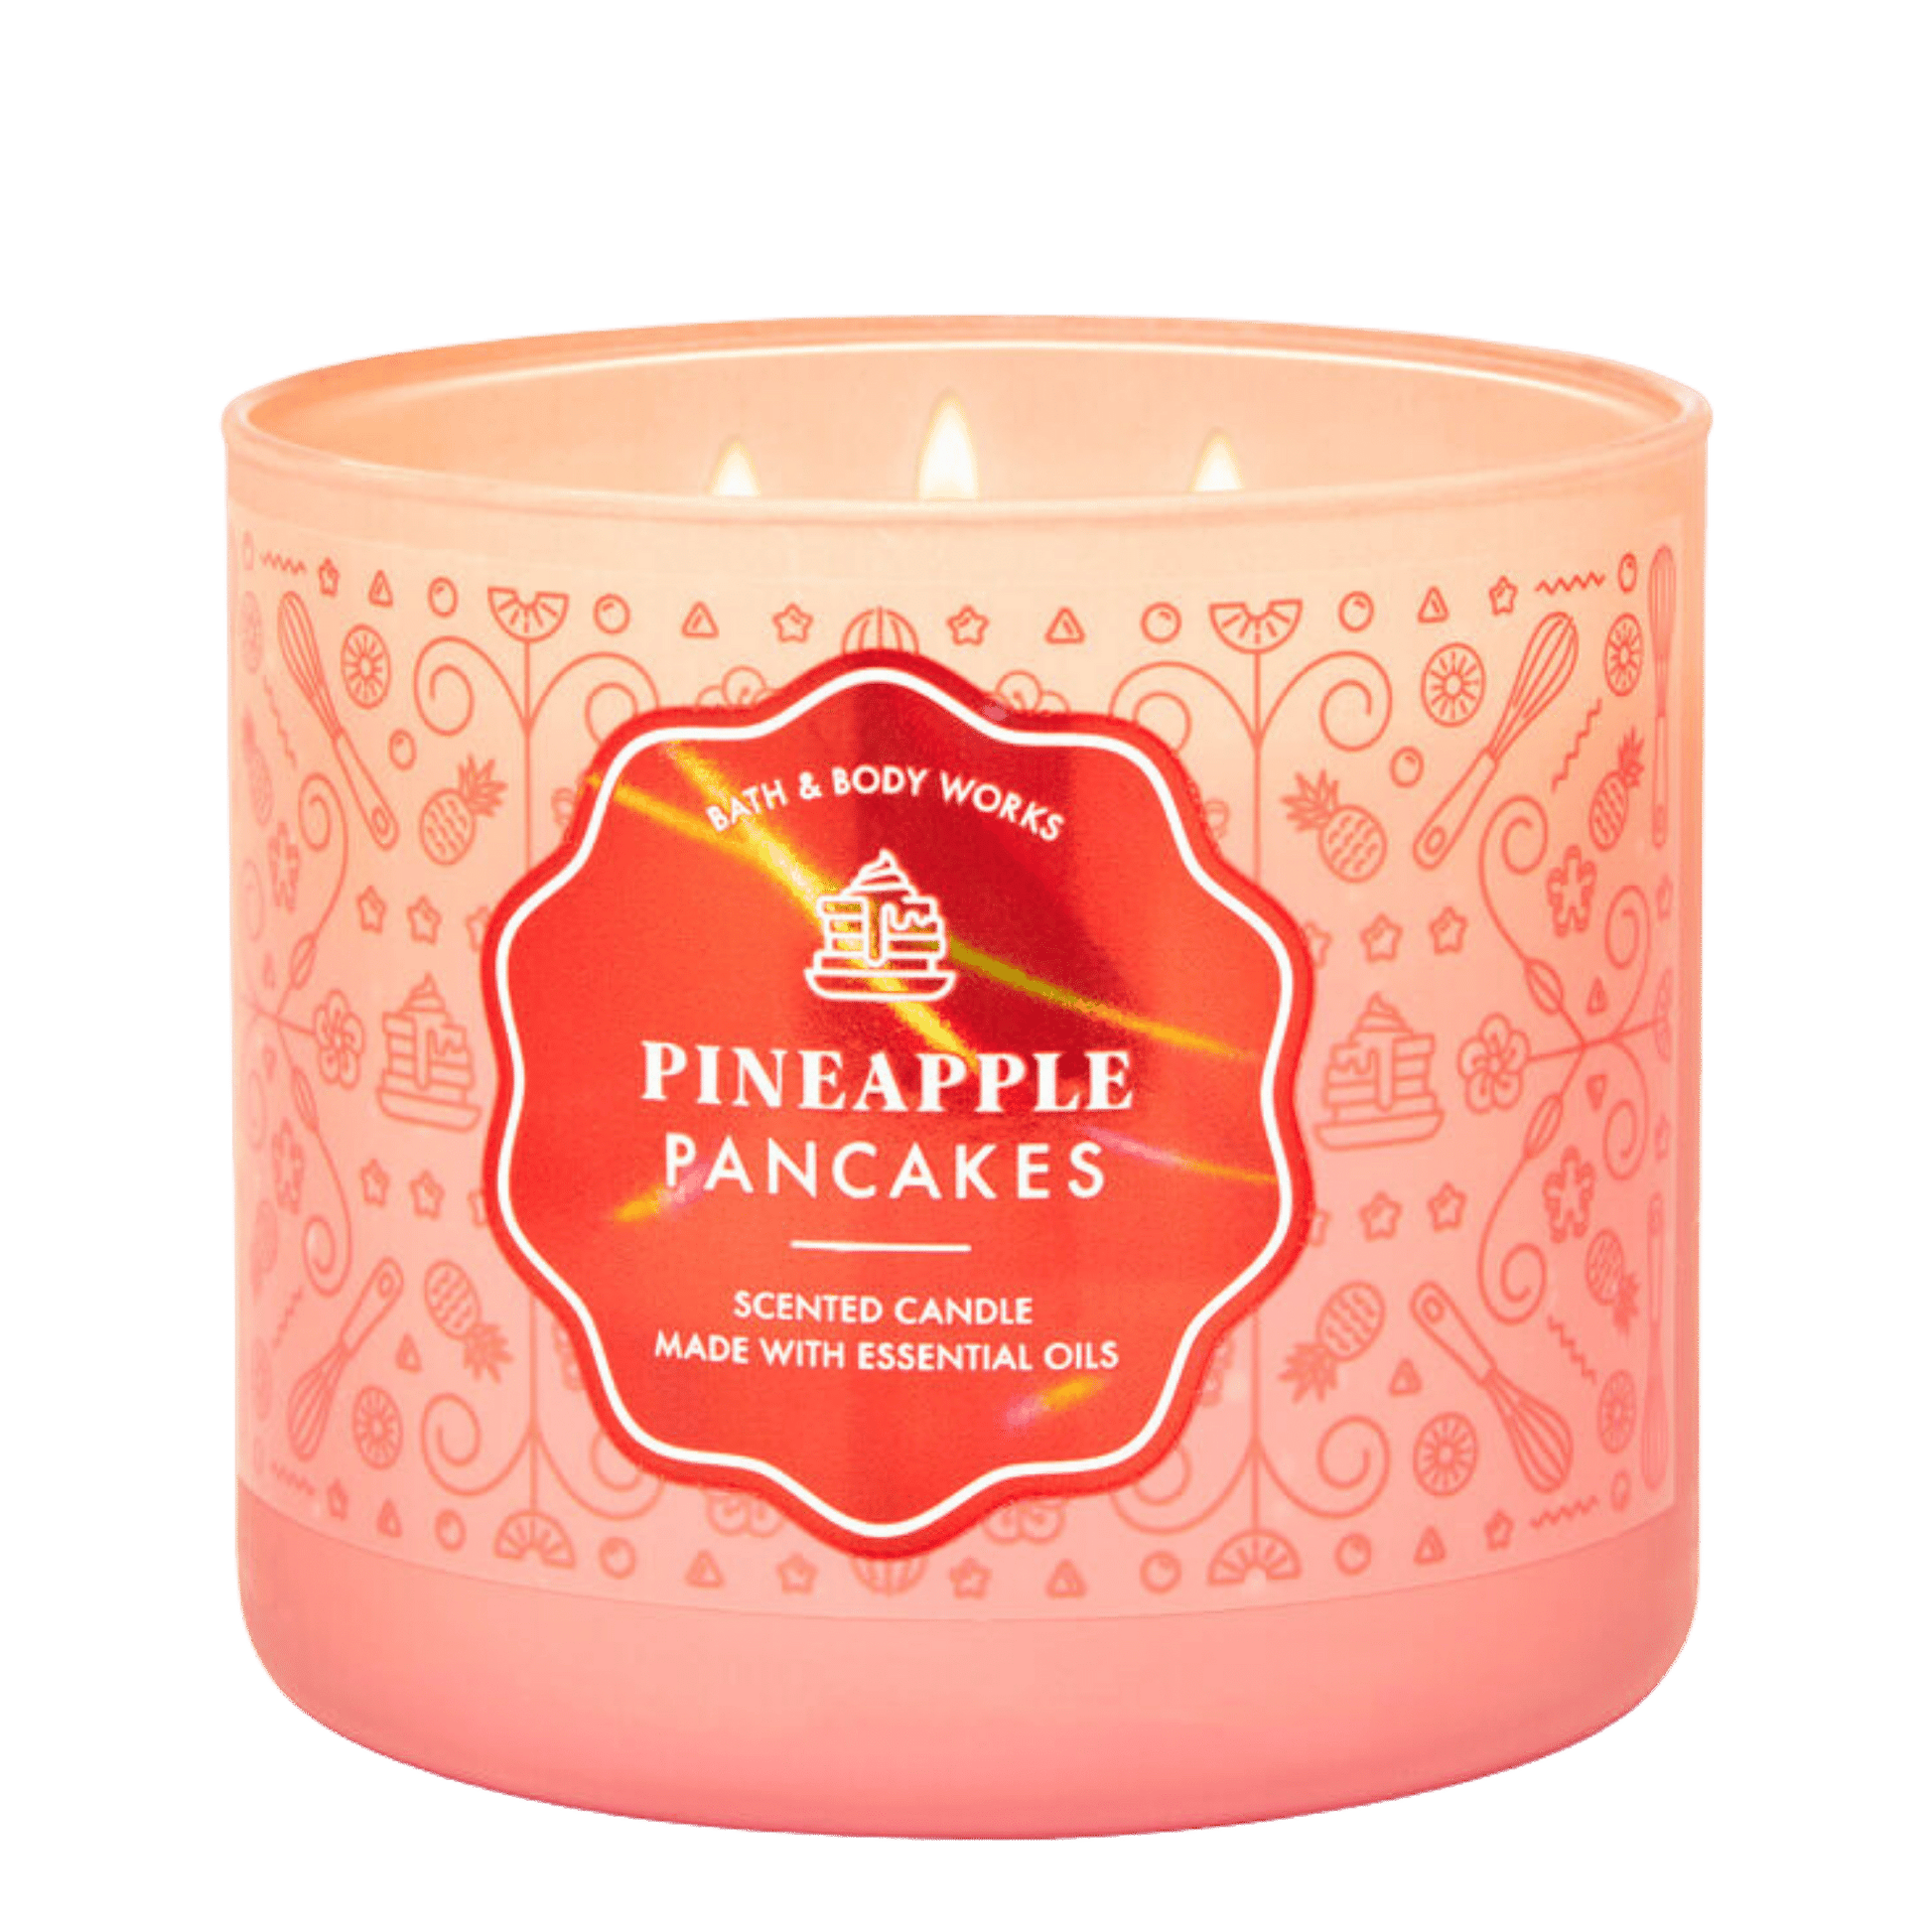 Pineapple Pancakes candle for sale in Paksitan